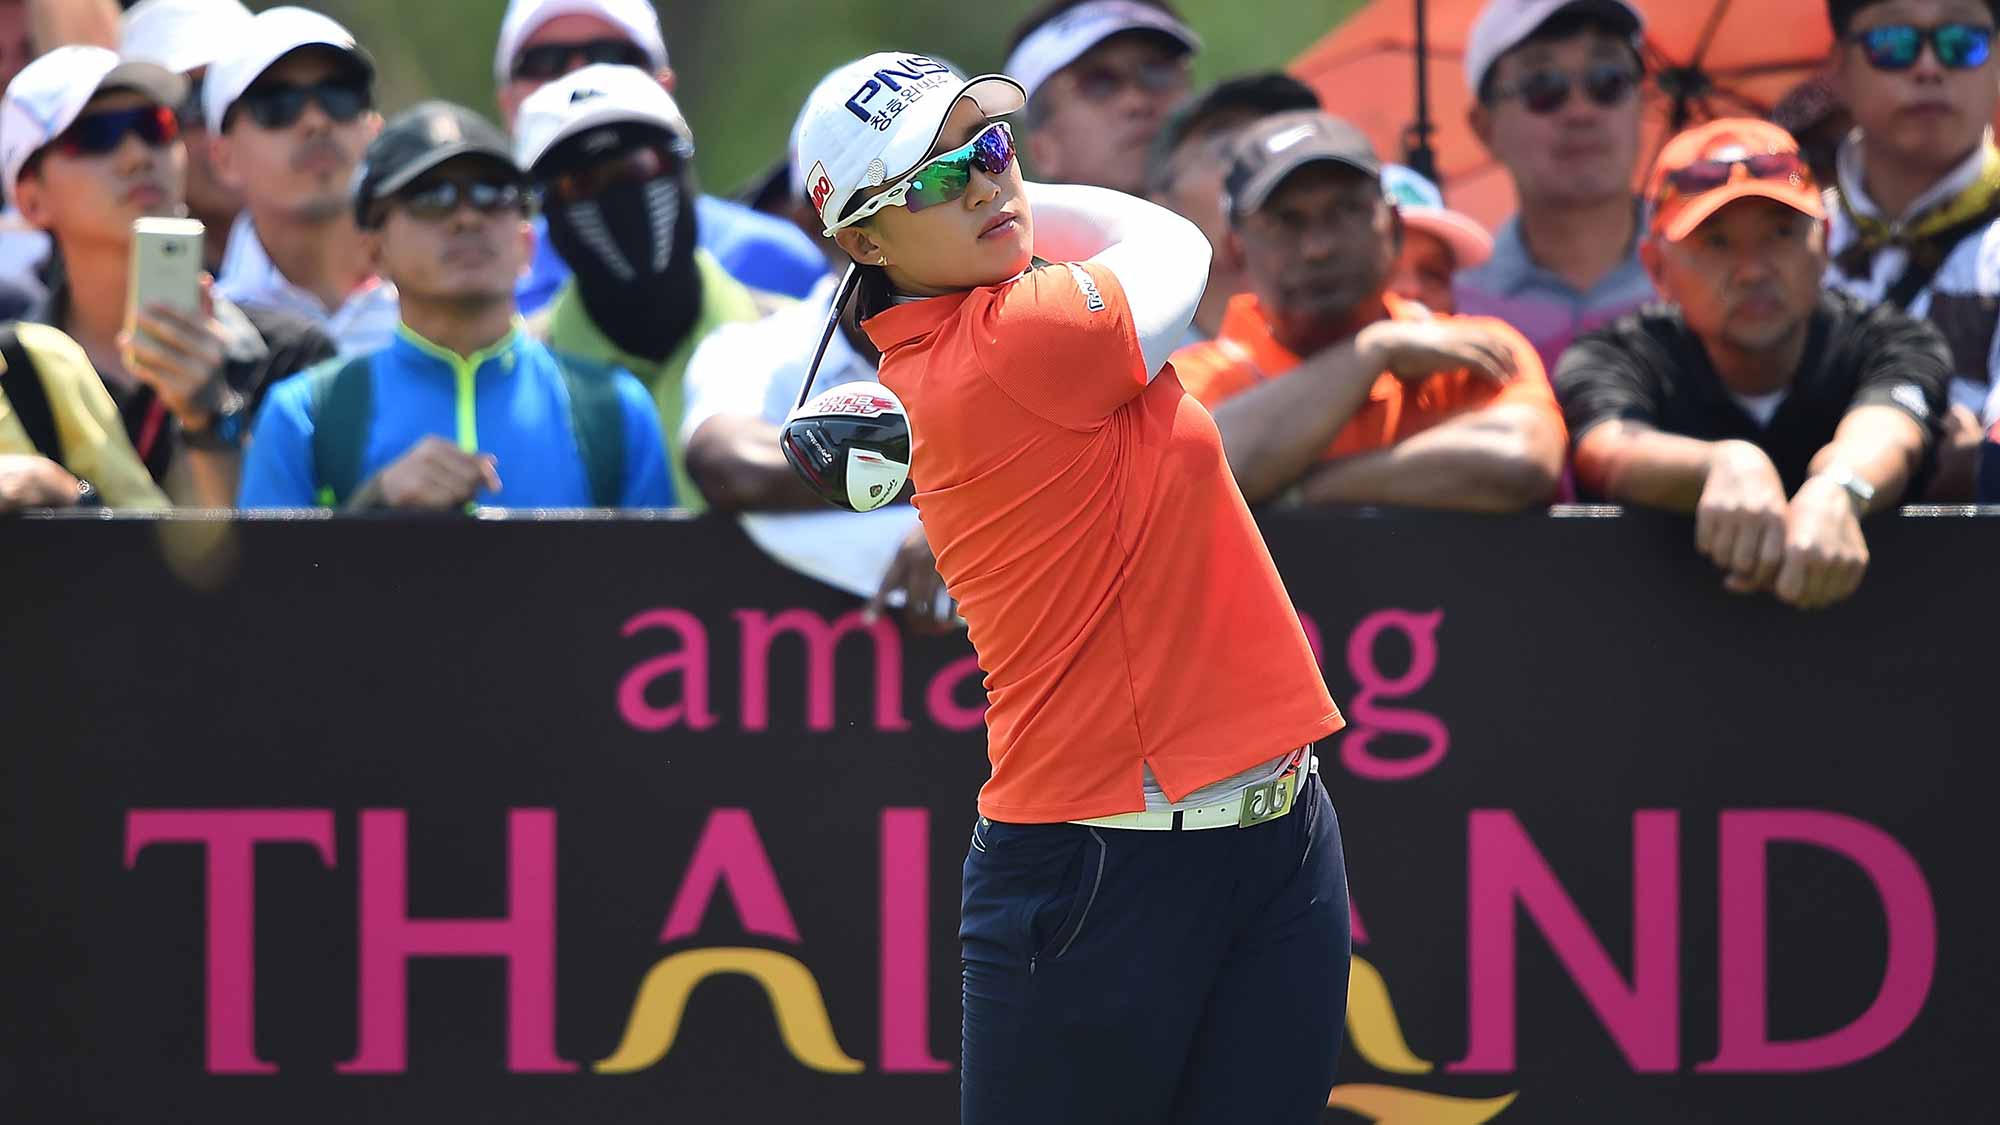 Amy Yang of South Korea plays a shot during day four of the 2016 Honda LPGA Thailand at Siam Country Club